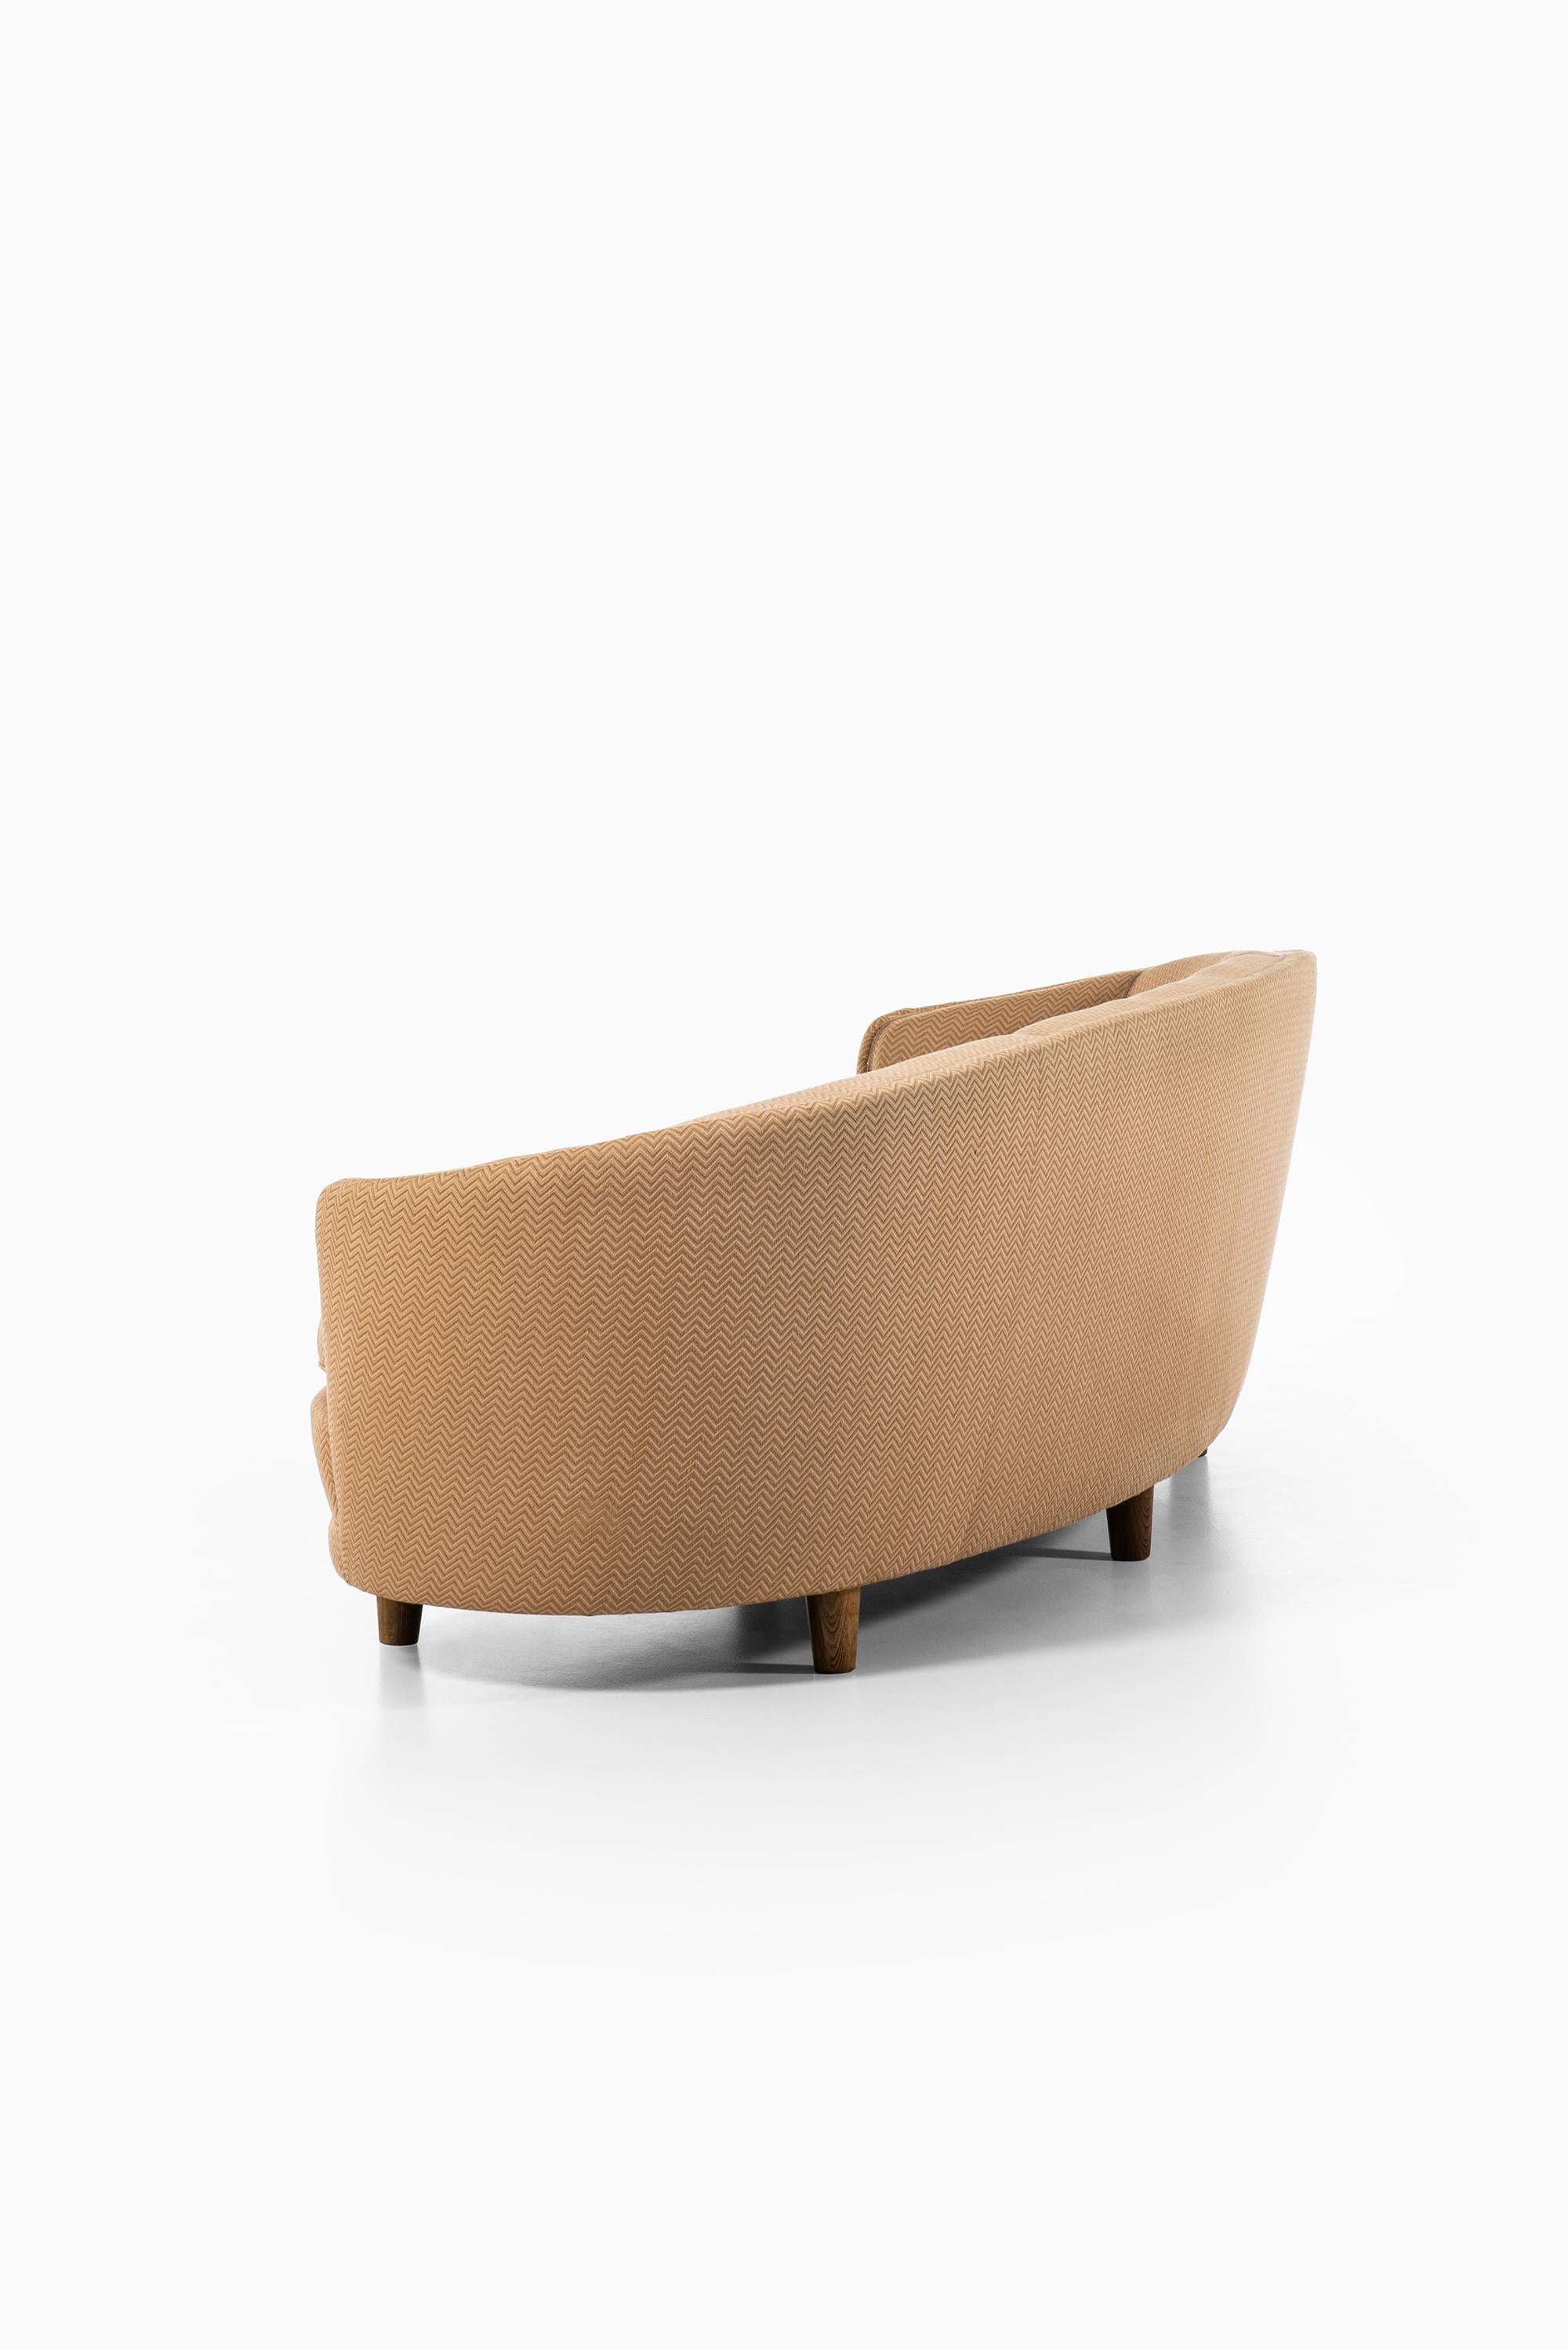 Otto Schulz Big Curved Sofa Produced by Boet in Sweden 2